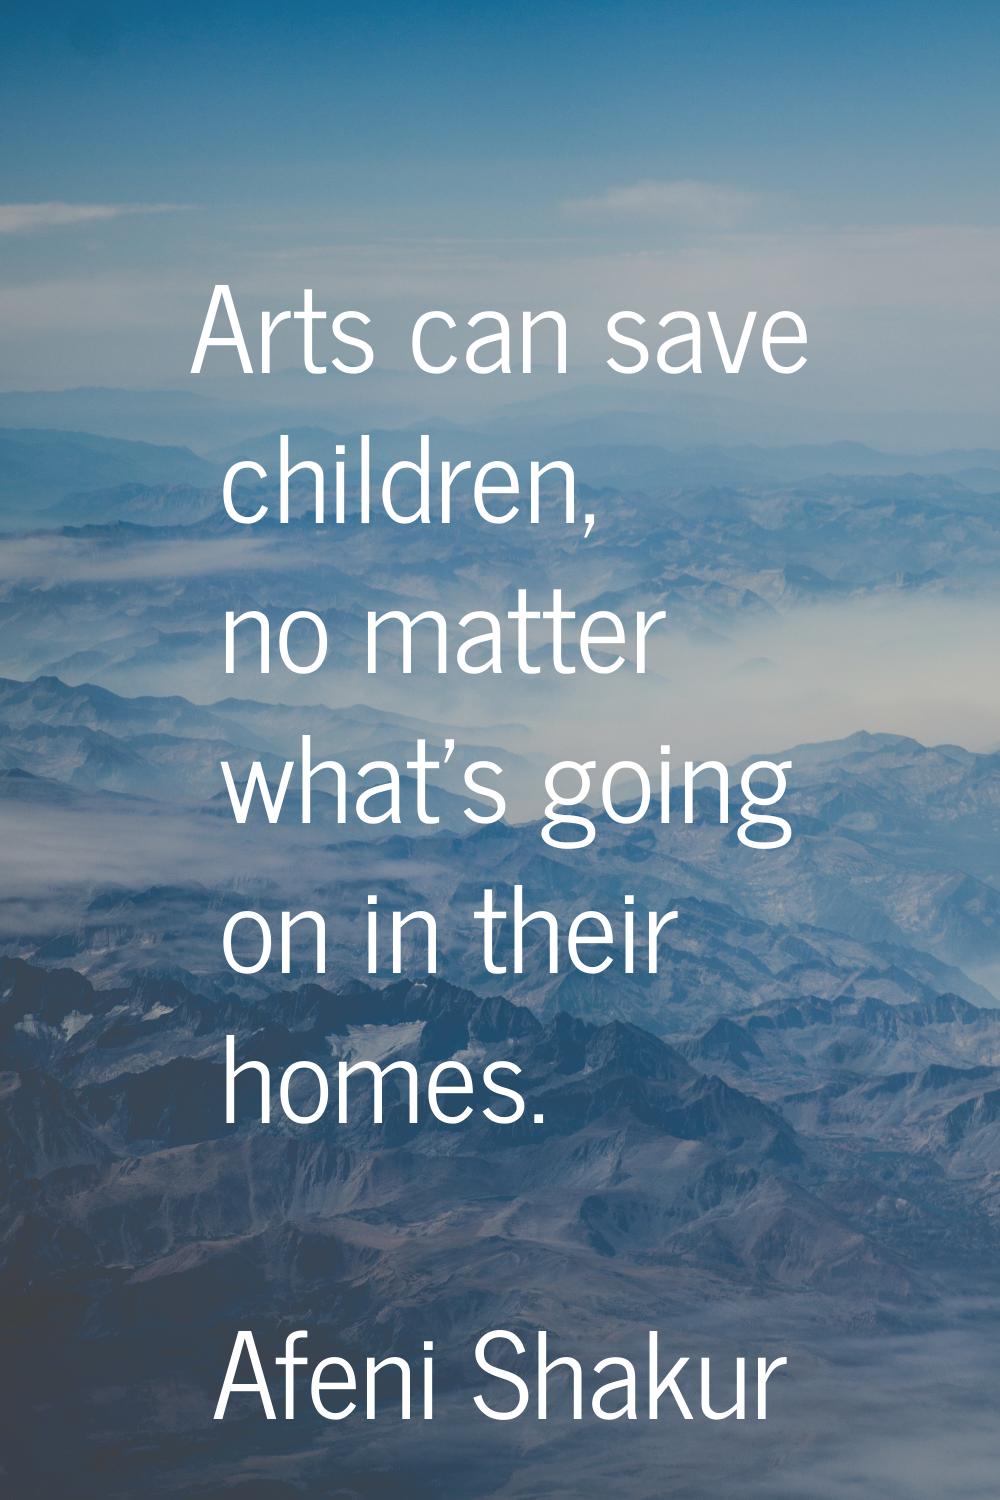 Arts can save children, no matter what's going on in their homes.